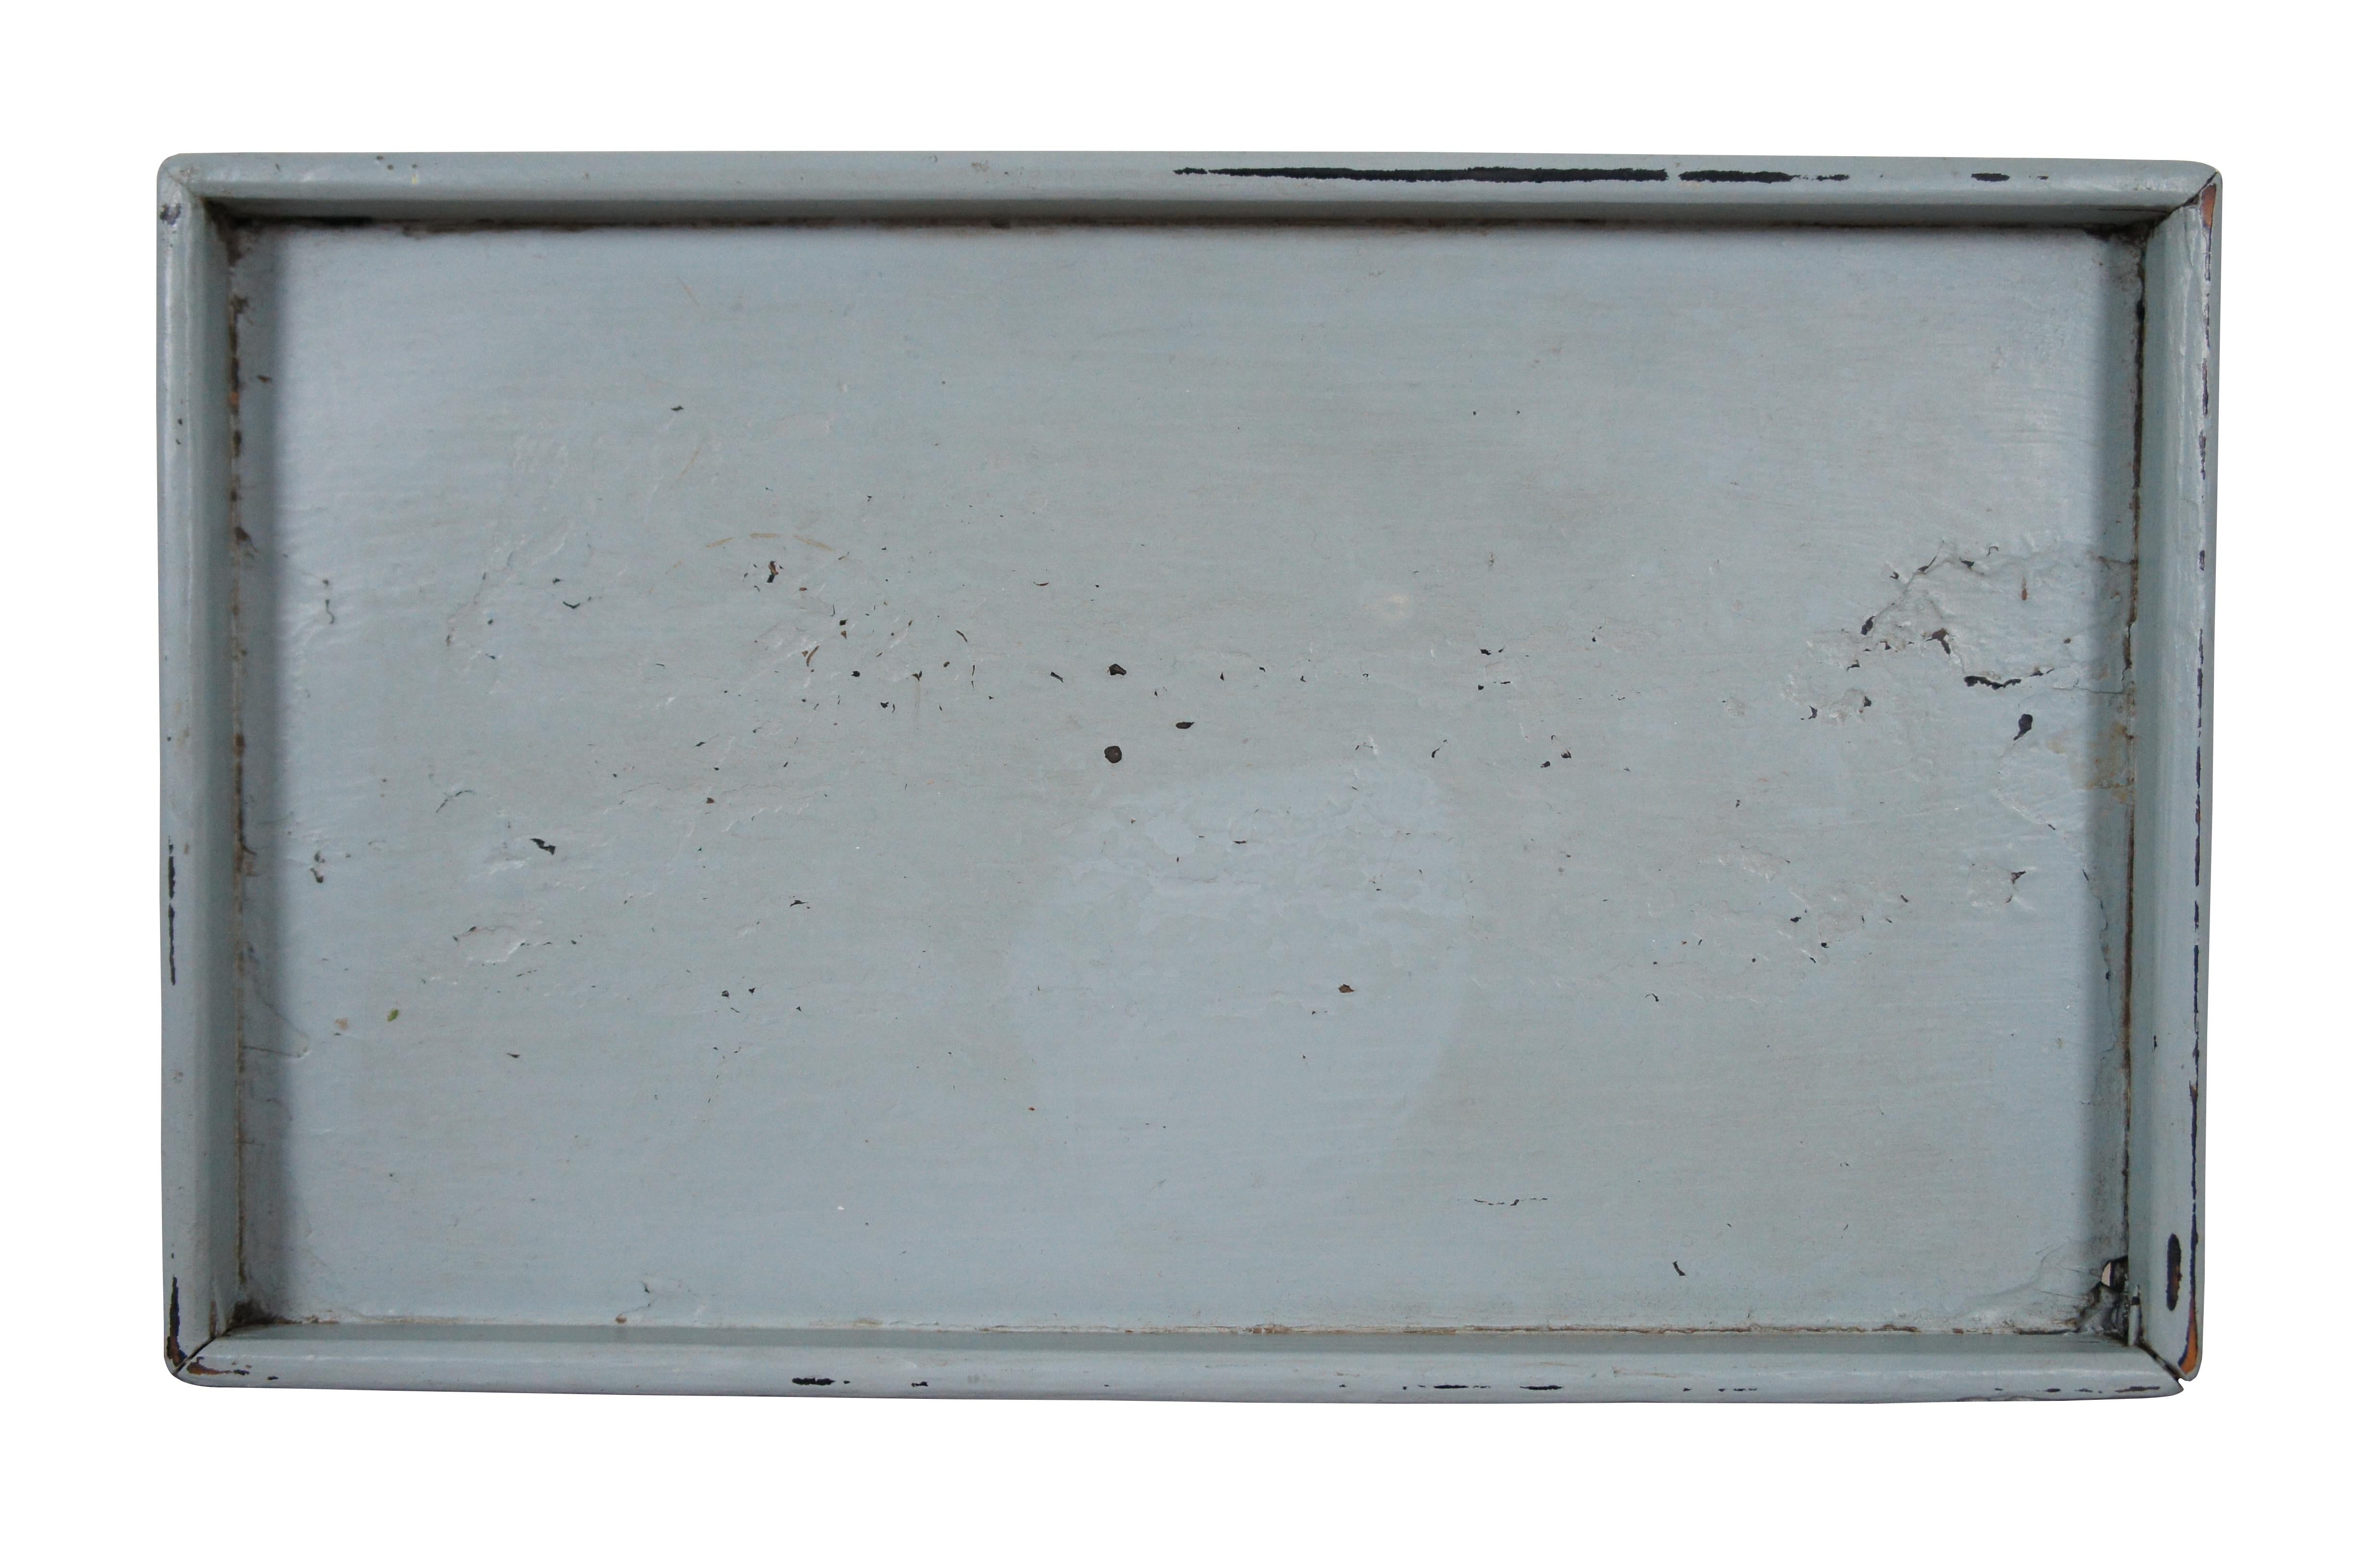 An intriguing English Country serving tray or dish.  Made from wood with a blue painted finish.

Dimension:
13.75